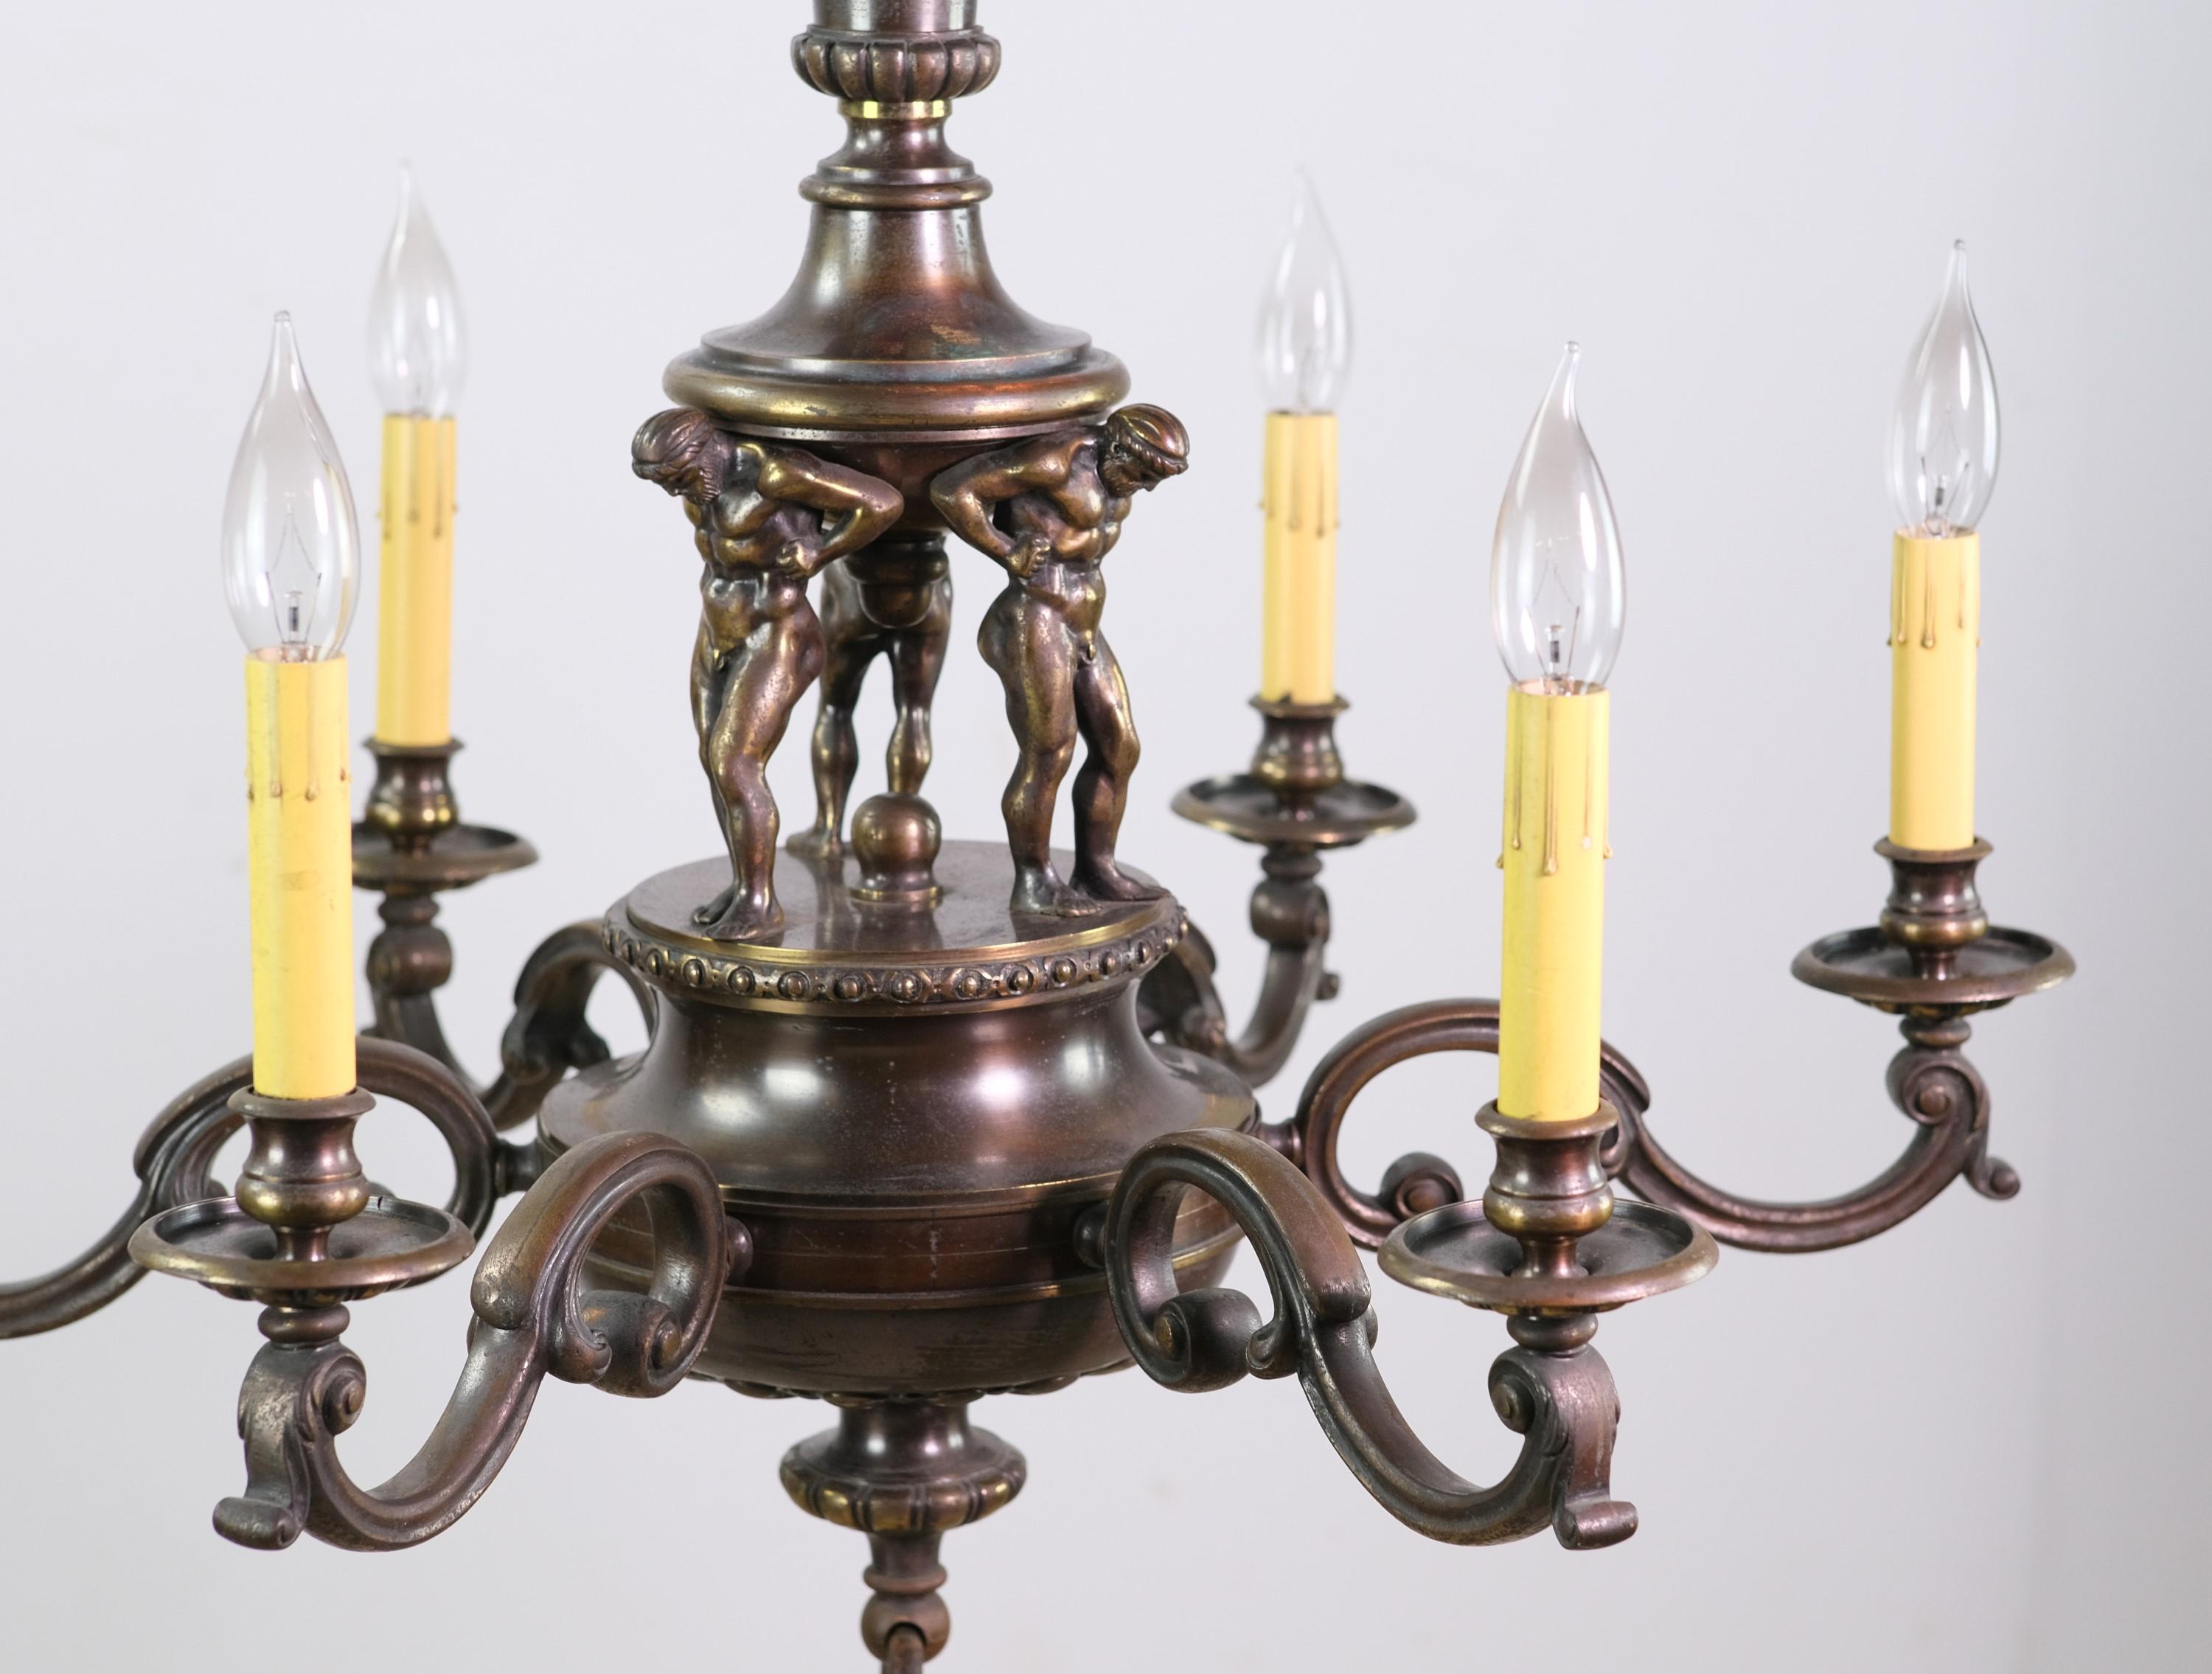 Early 20th century highly detailed bronze French Empire bronze chandelier. Features three male Atlas figures holding up the upper hub of the chandelier resting on their backs. Comes with the original ceiling canopy.